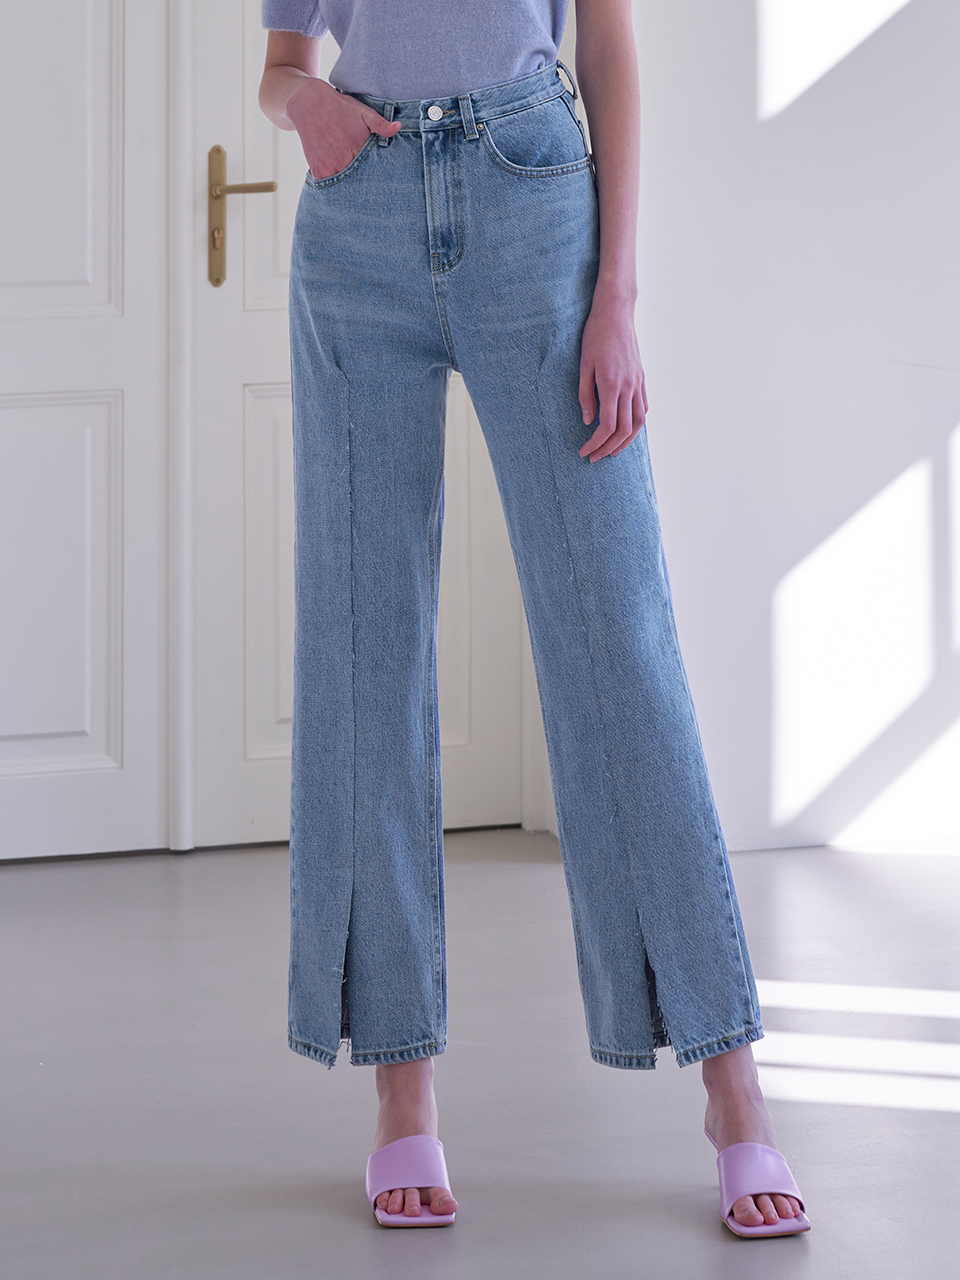 [WIDE] Road Jeans